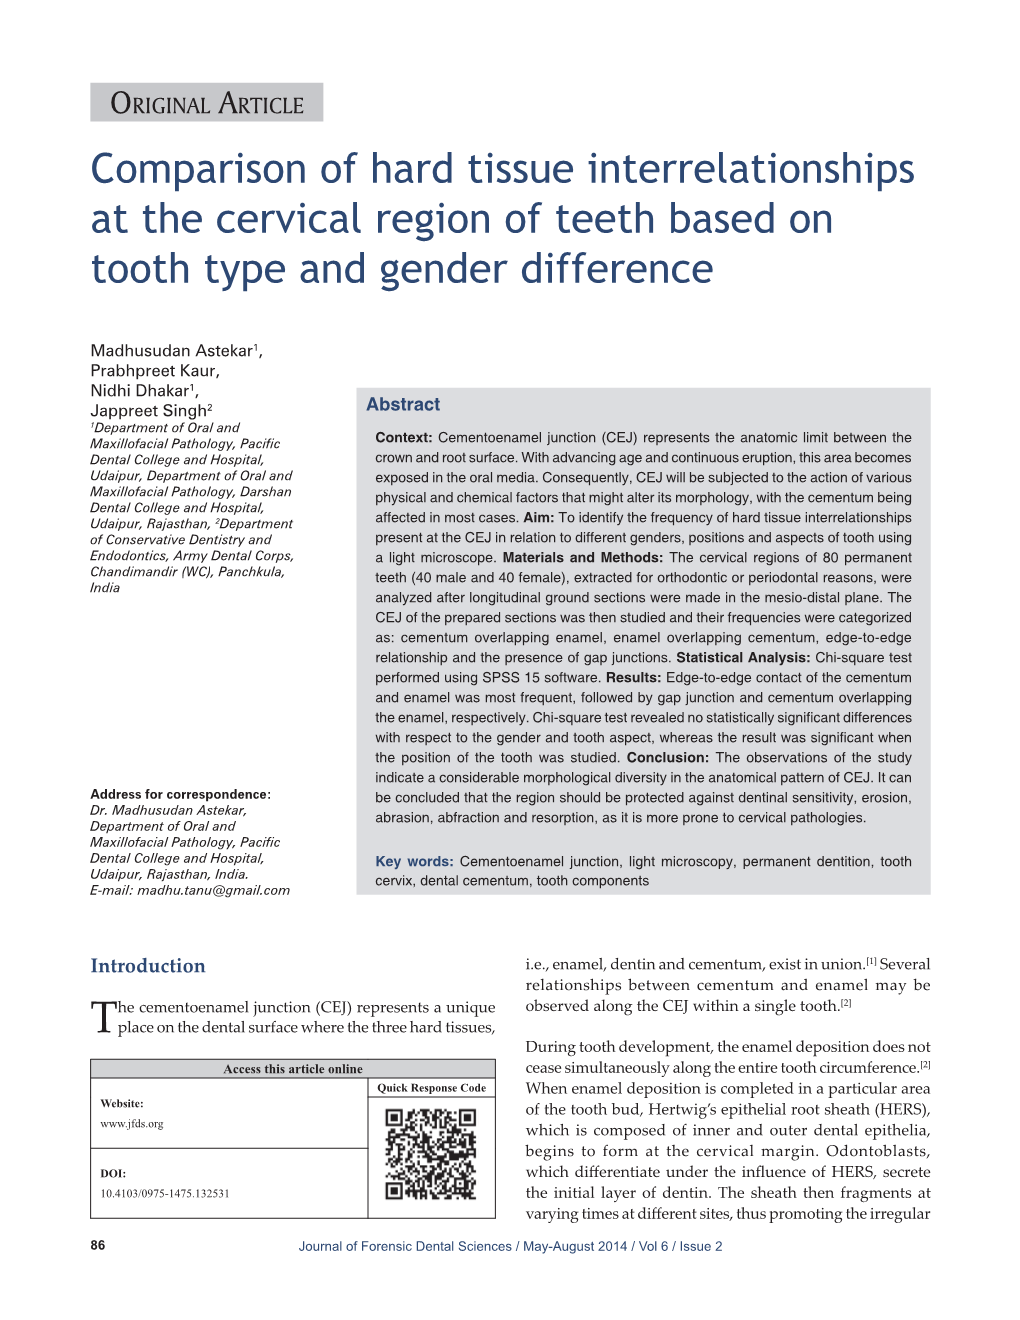 Comparison of Hard Tissue Interrelationships at the Cervical Region of Teeth Based on Tooth Type and Gender Difference